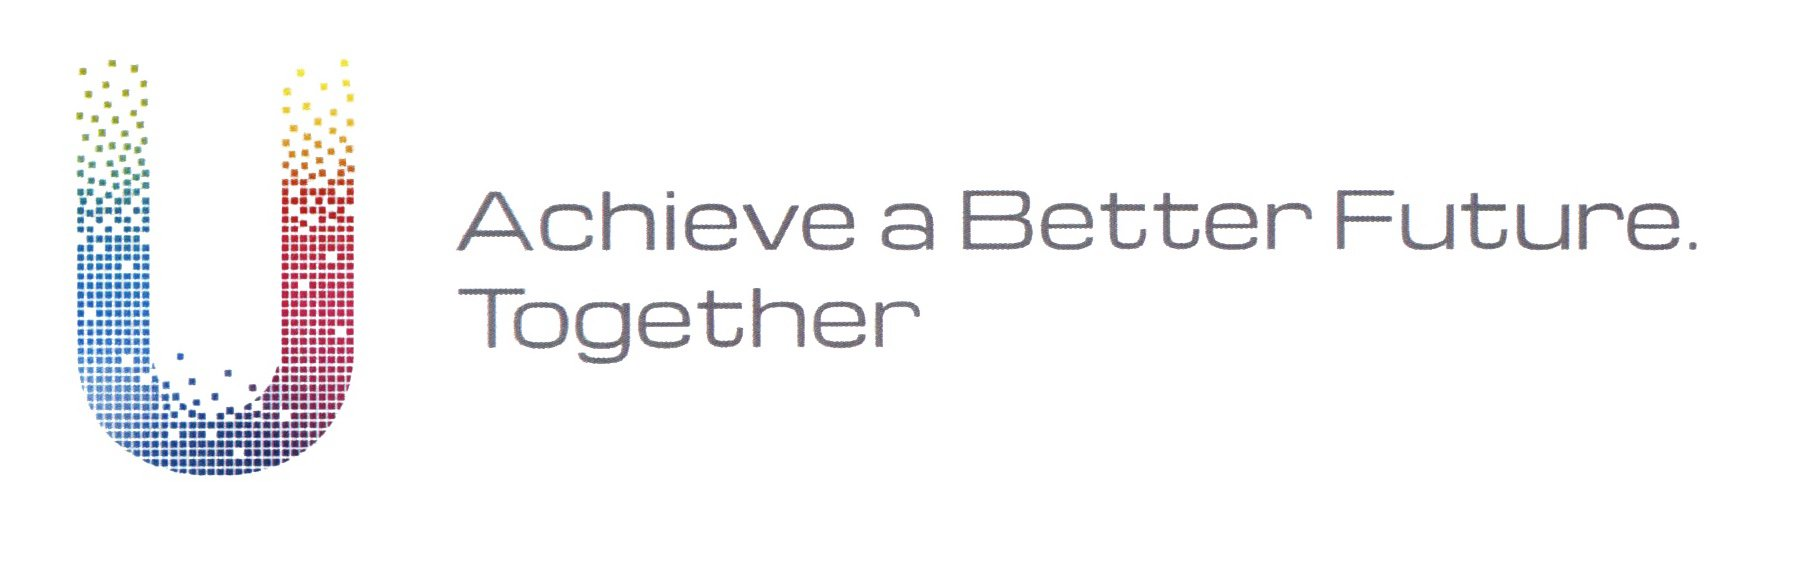  ACHIEVE A BETTER FUTURE TOGETHER